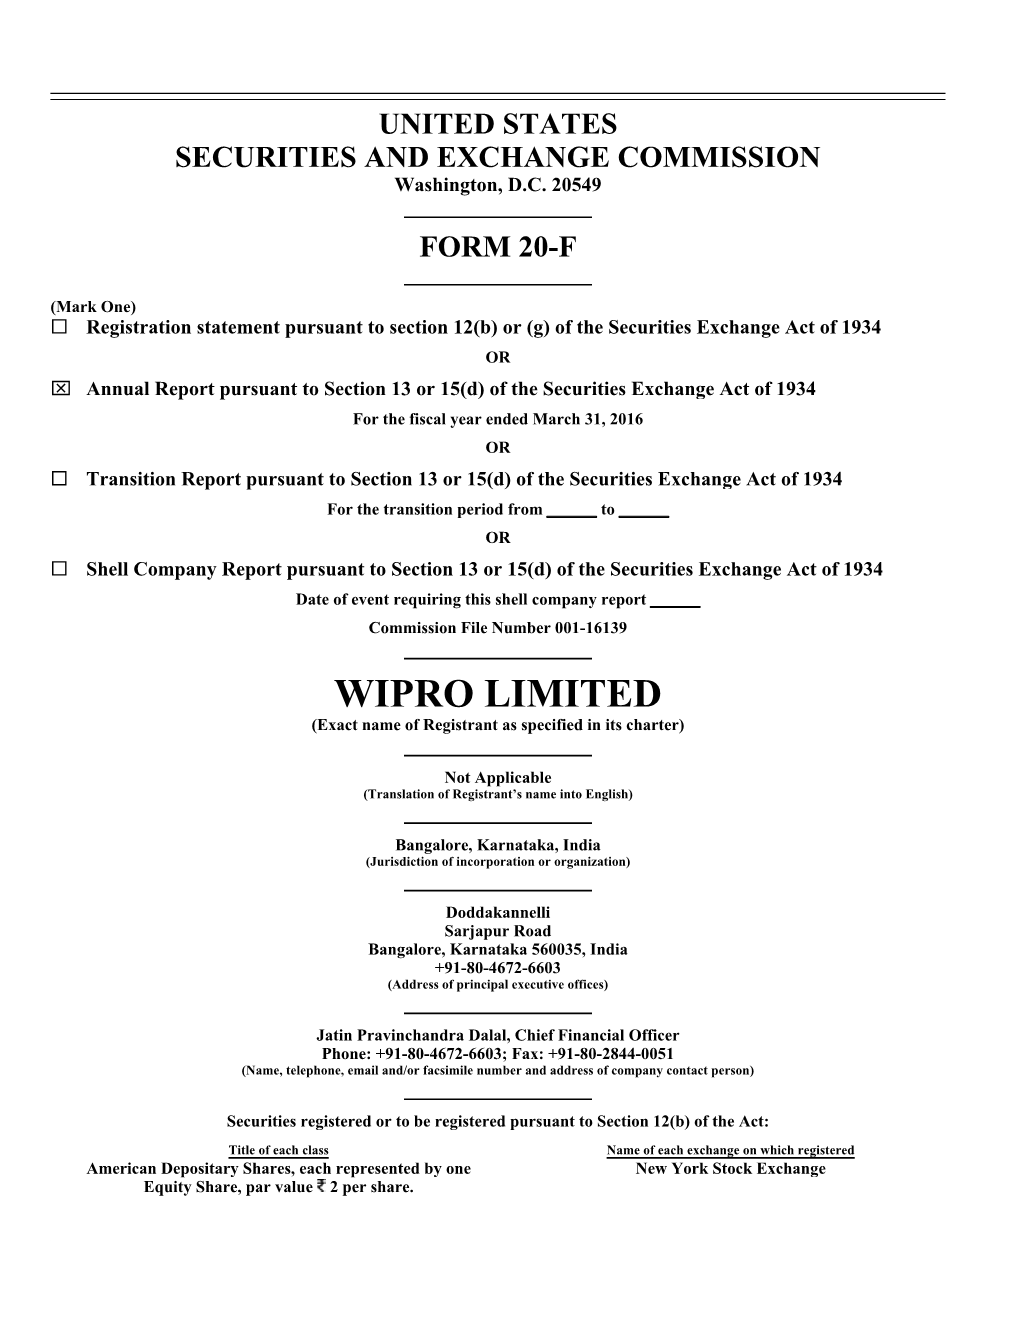 WIPRO LIMITED (Exact Name of Registrant As Specified in Its Charter)